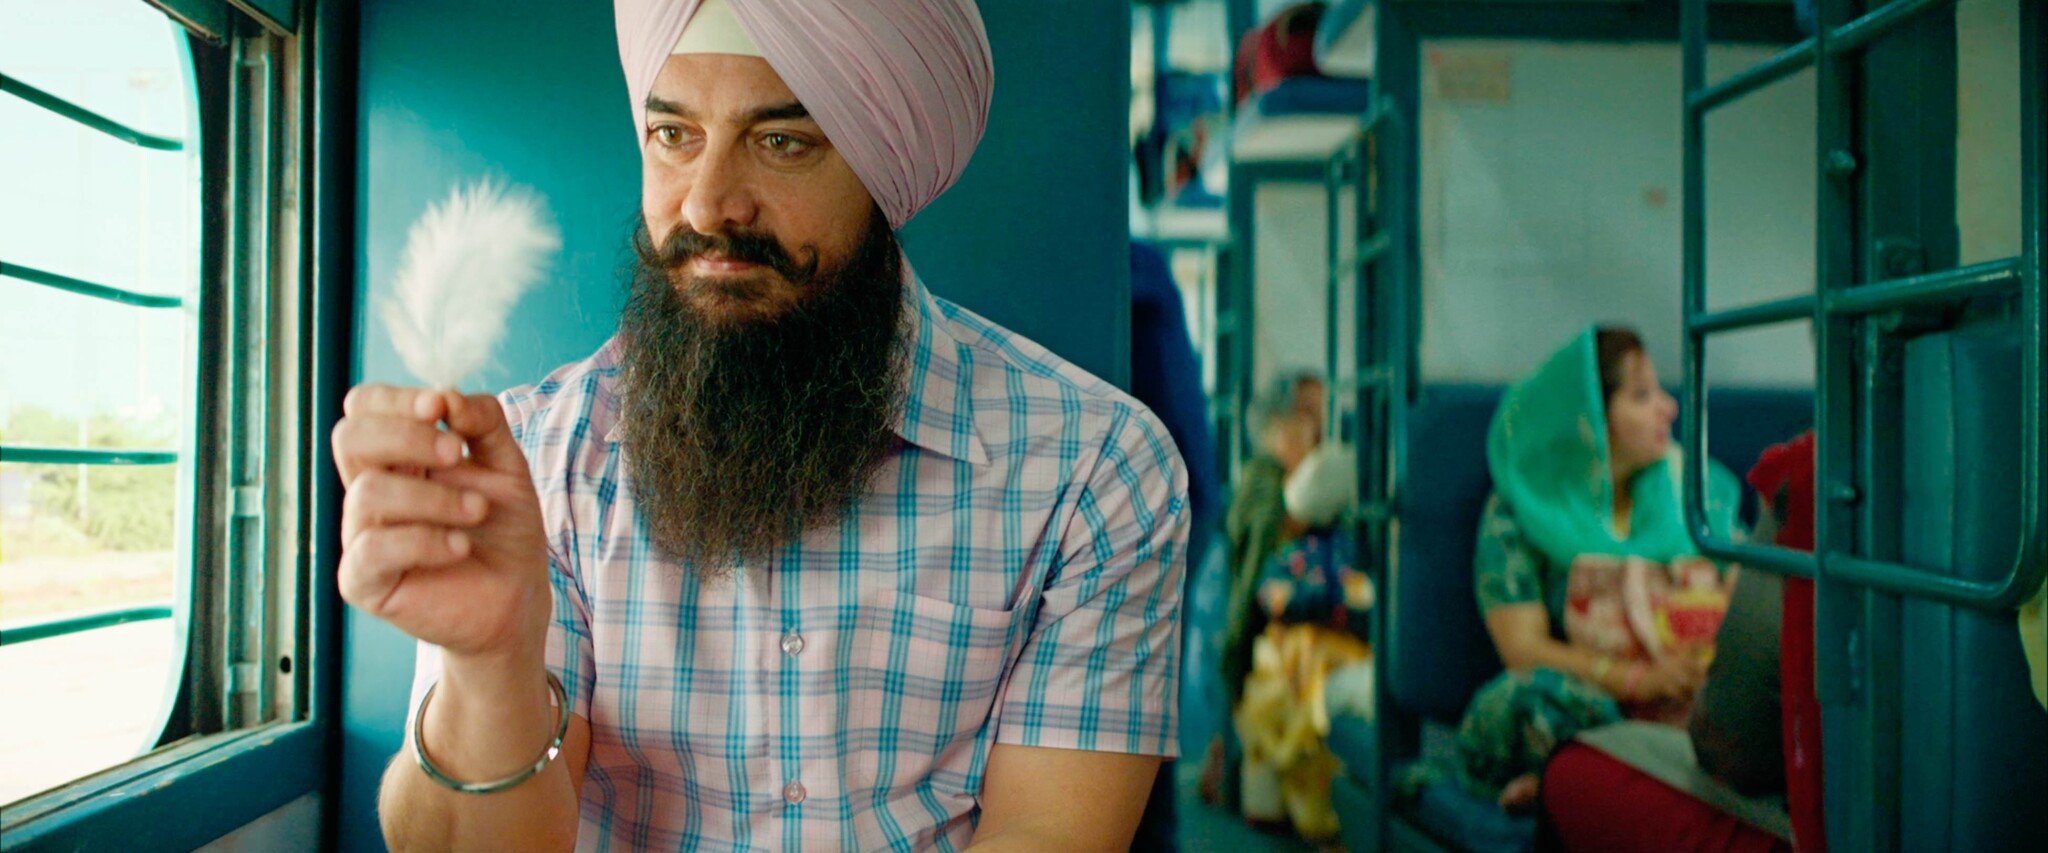 Bollywood’s ‘Forrest Gump’ Remake Takes Some Major Swings